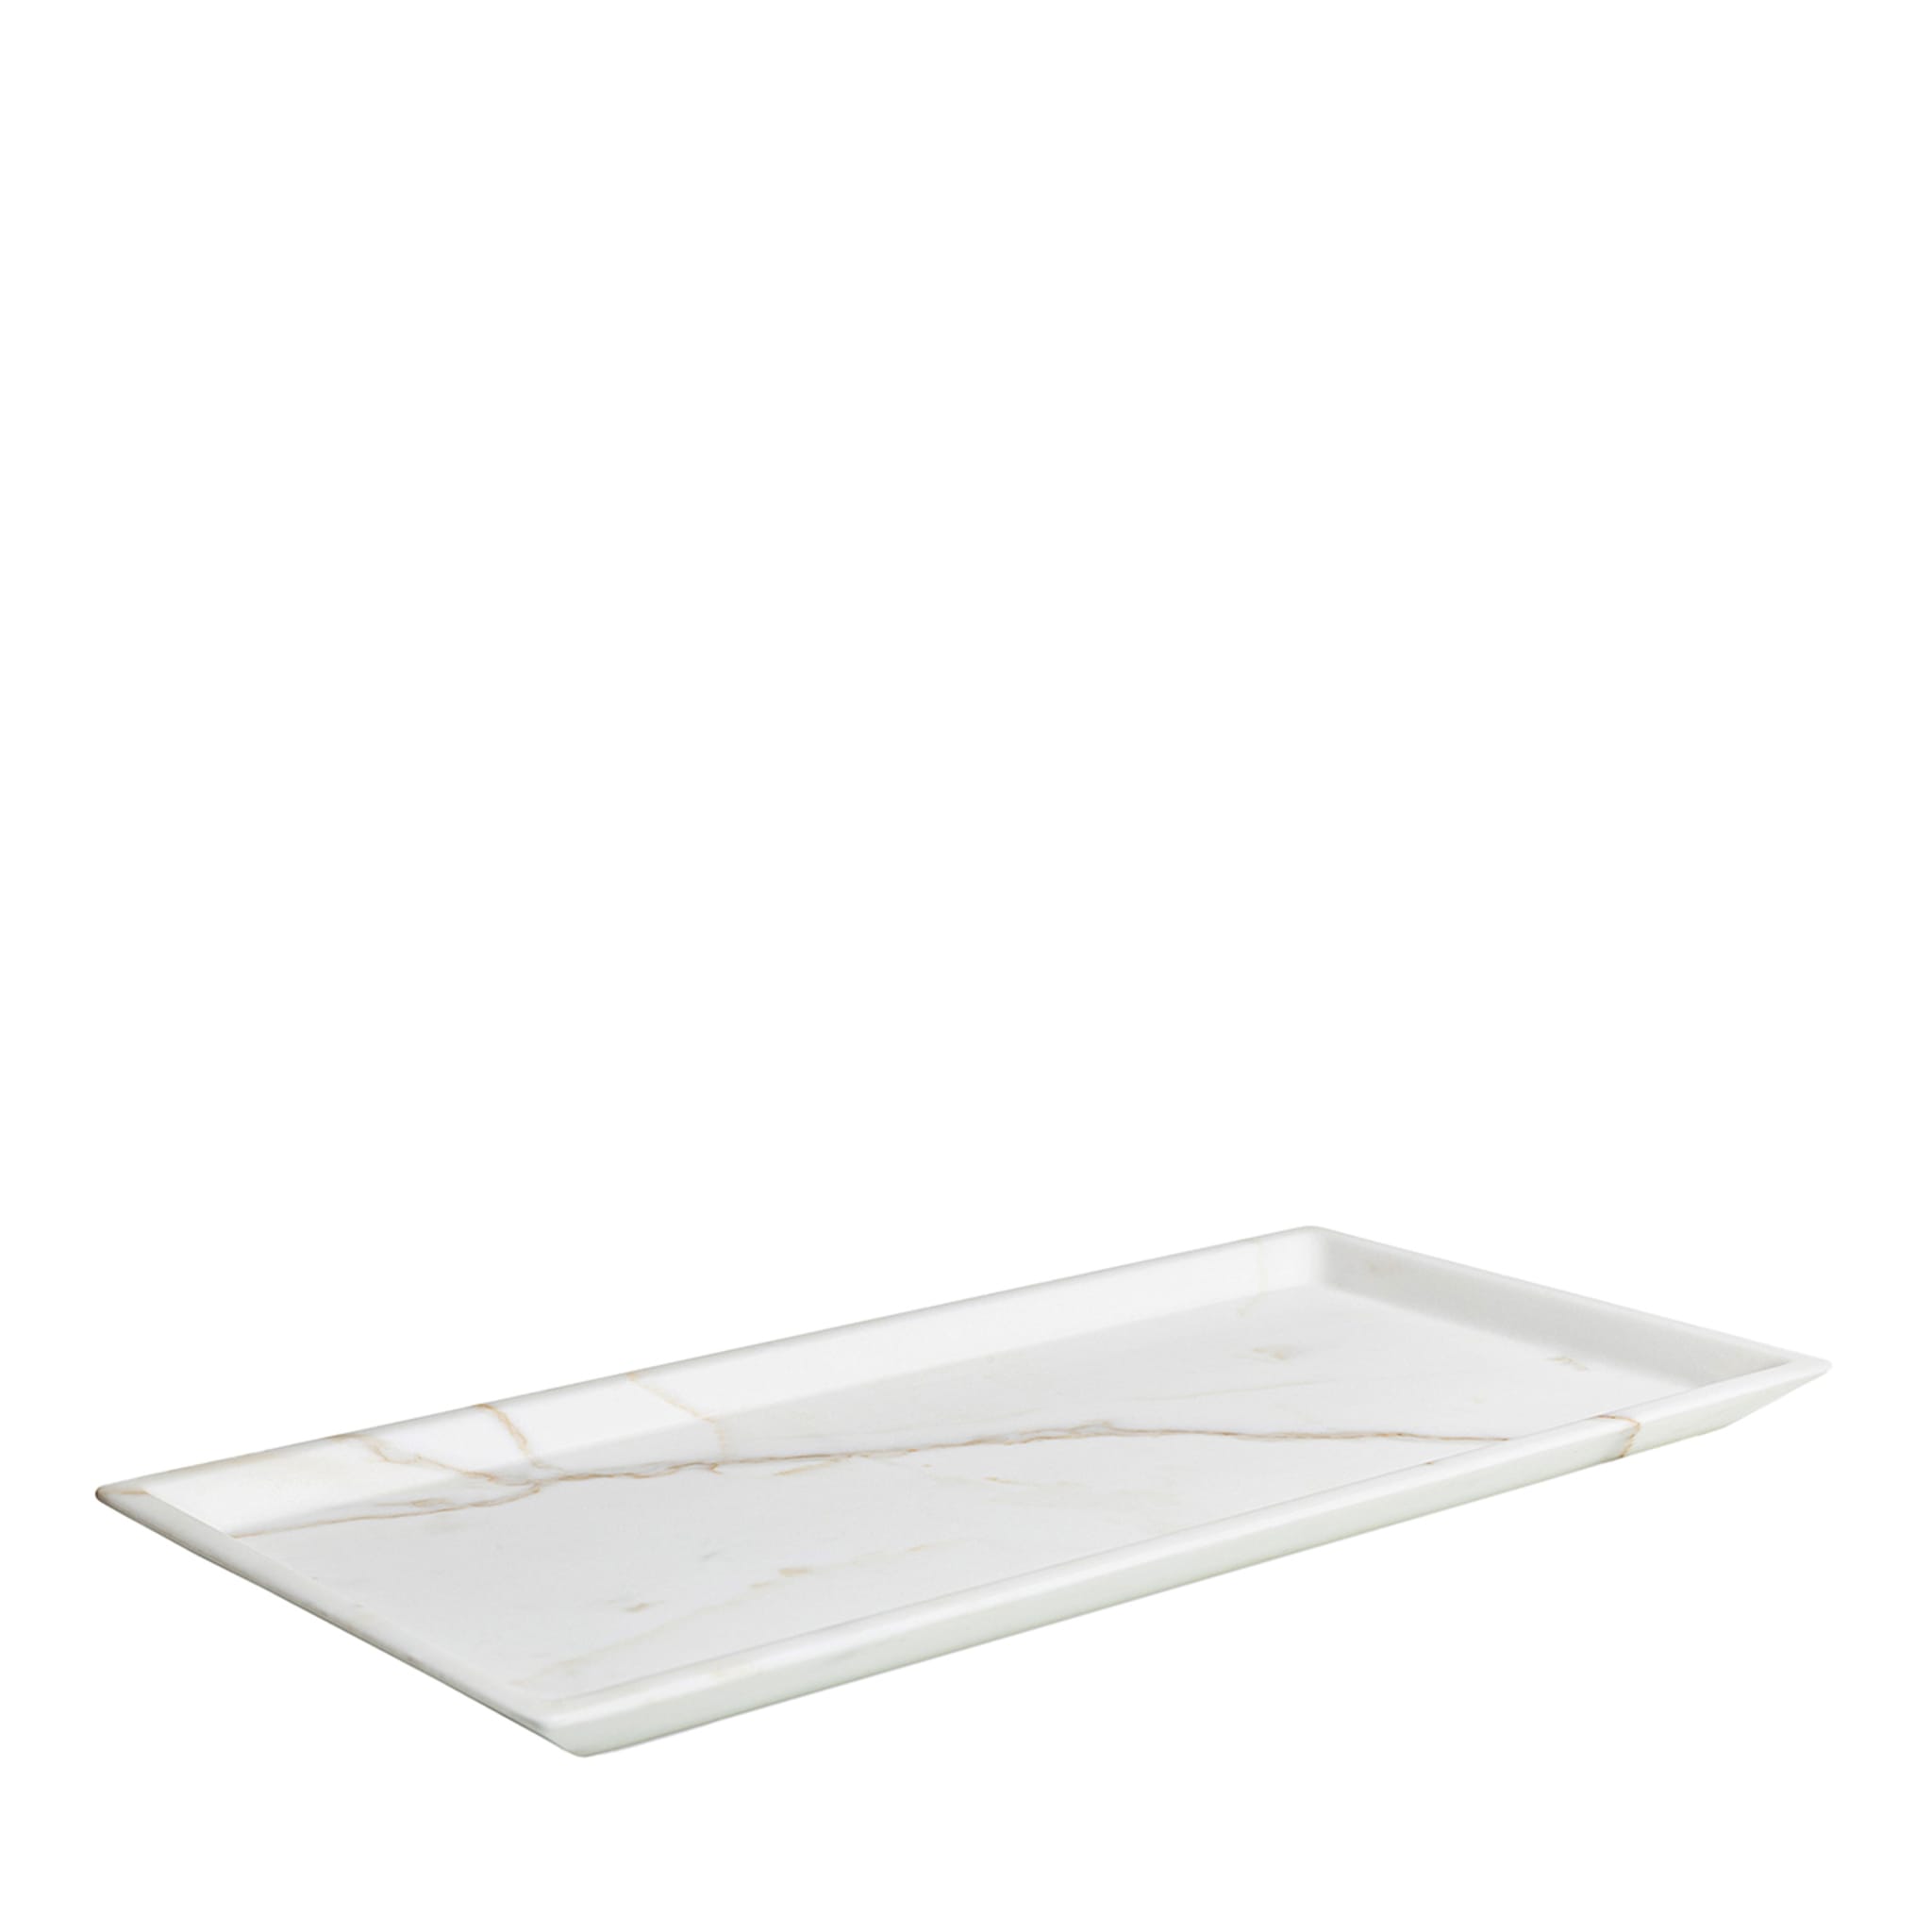 Tray in Gold Calacatta Marble by Studioformat - Main view